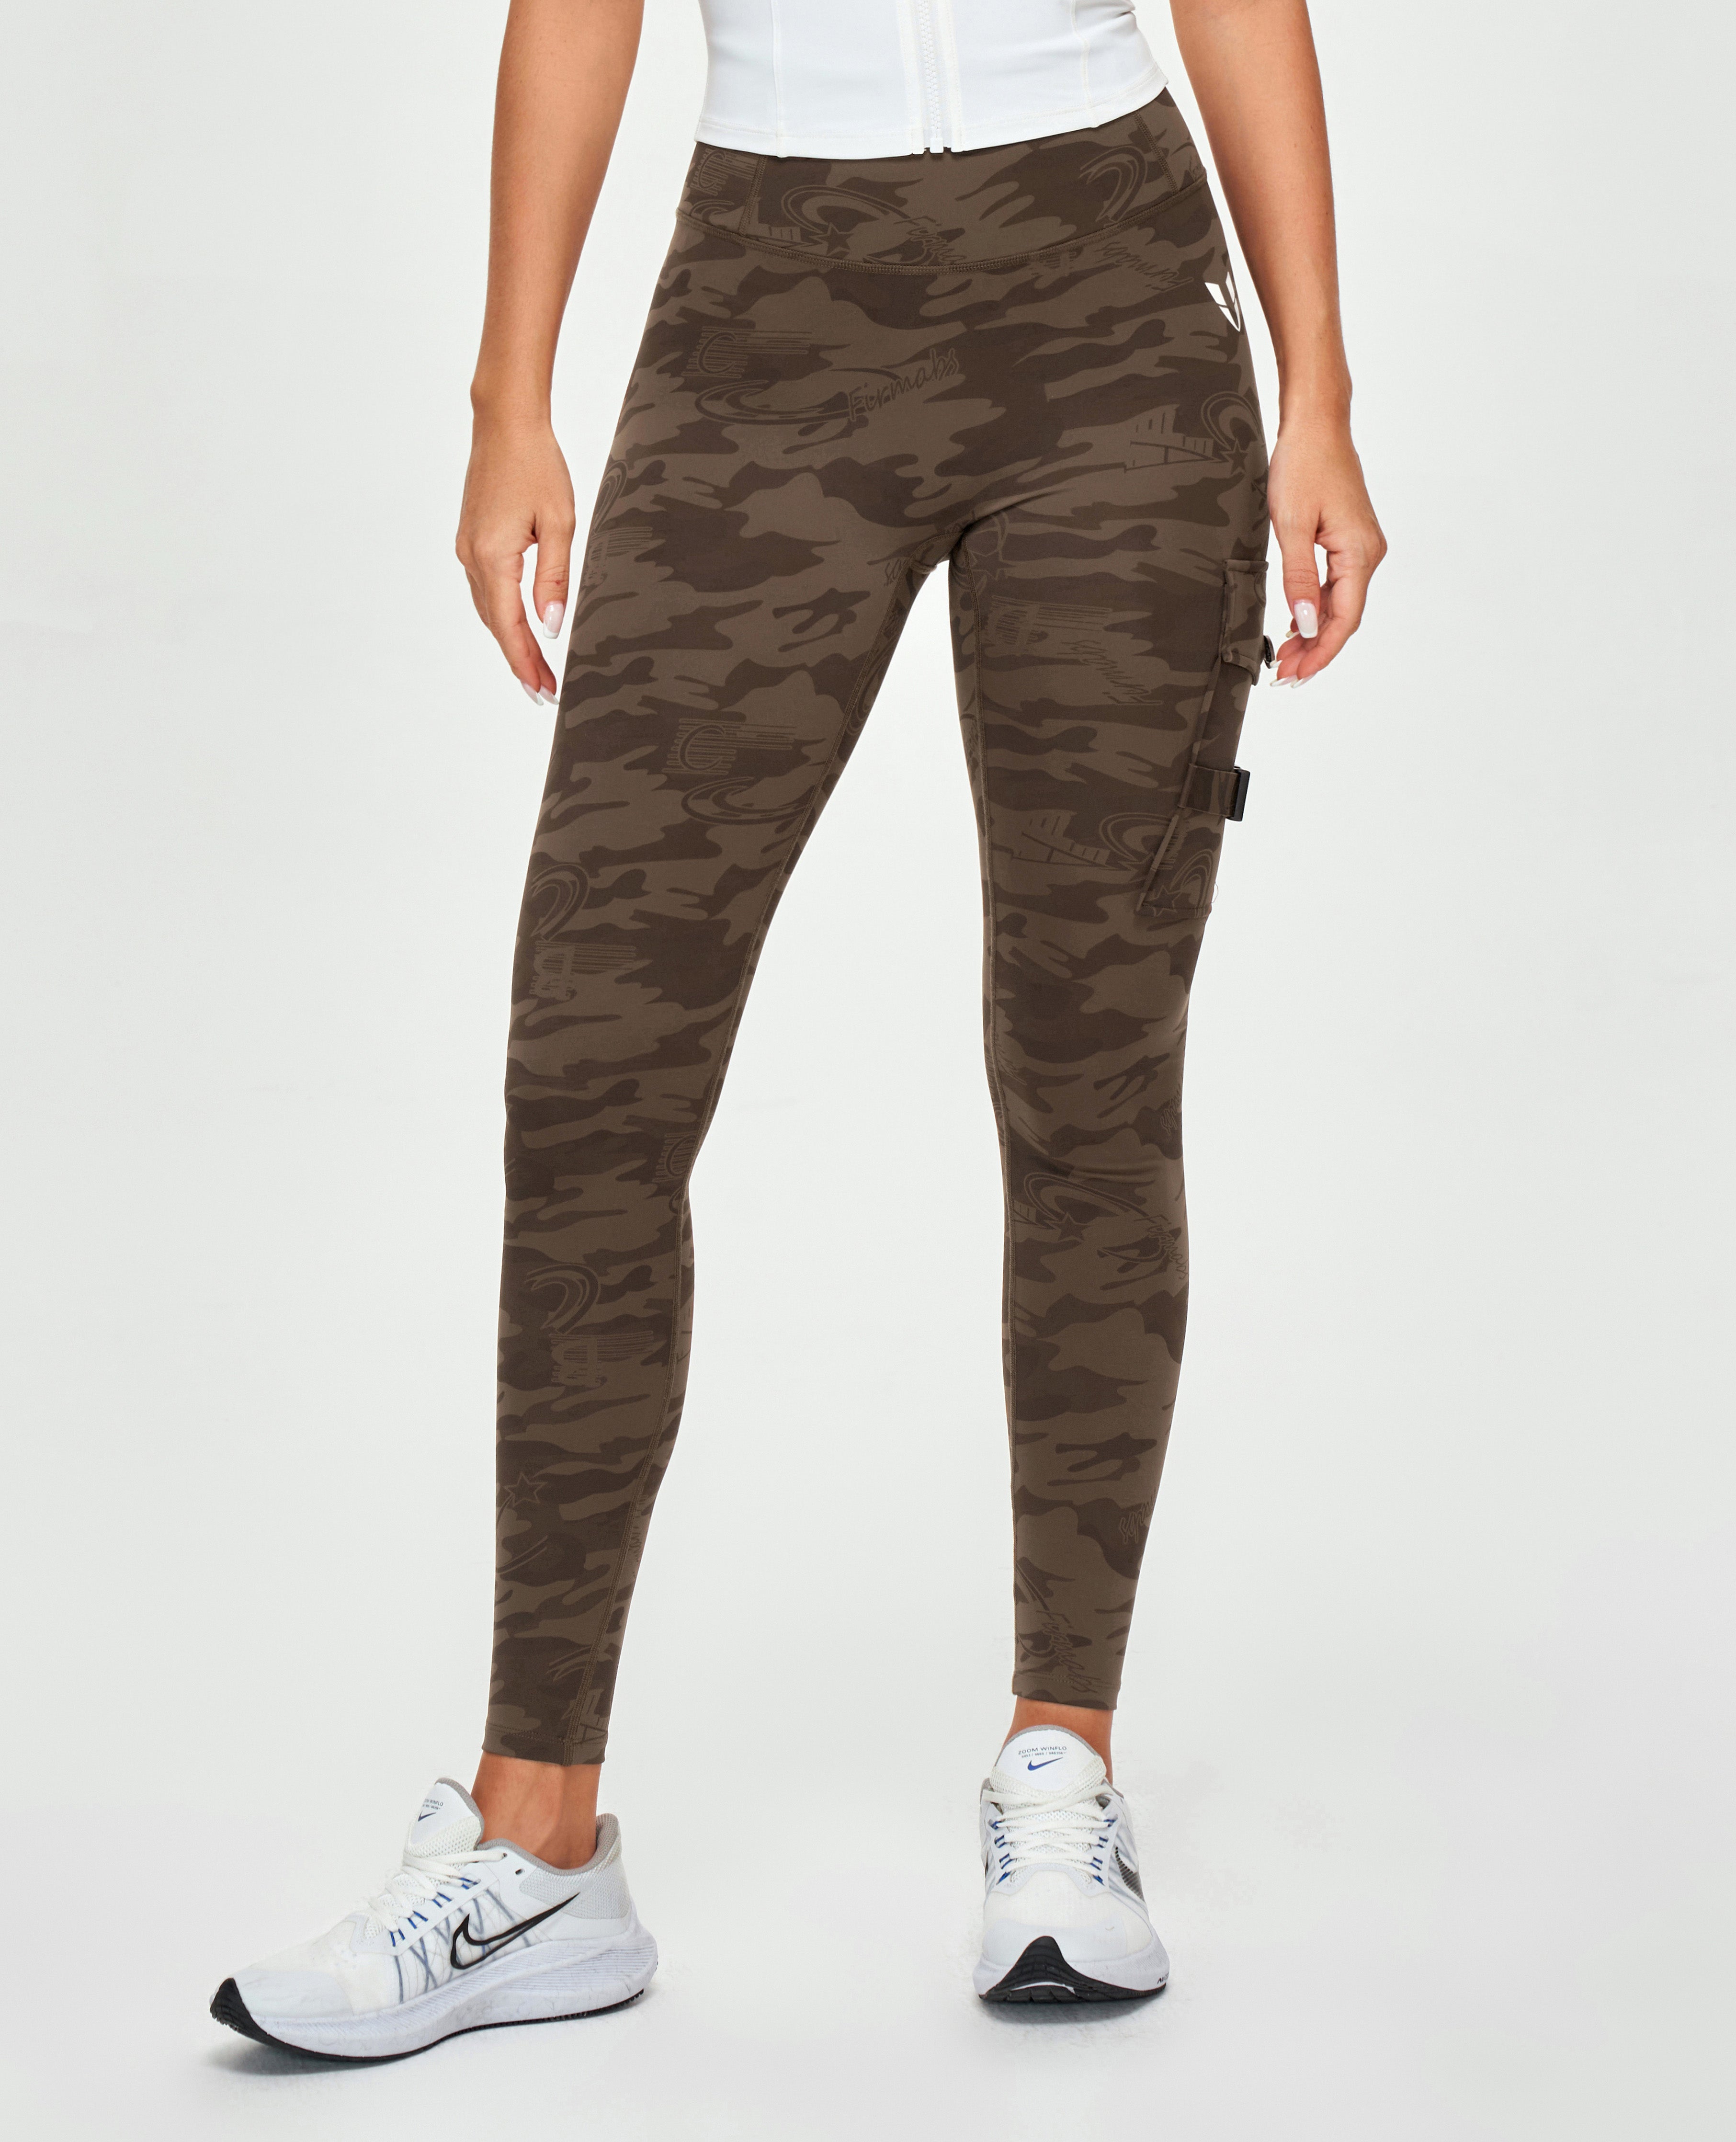 French Laundry Camo Brown Leggings Size XL - 37% off